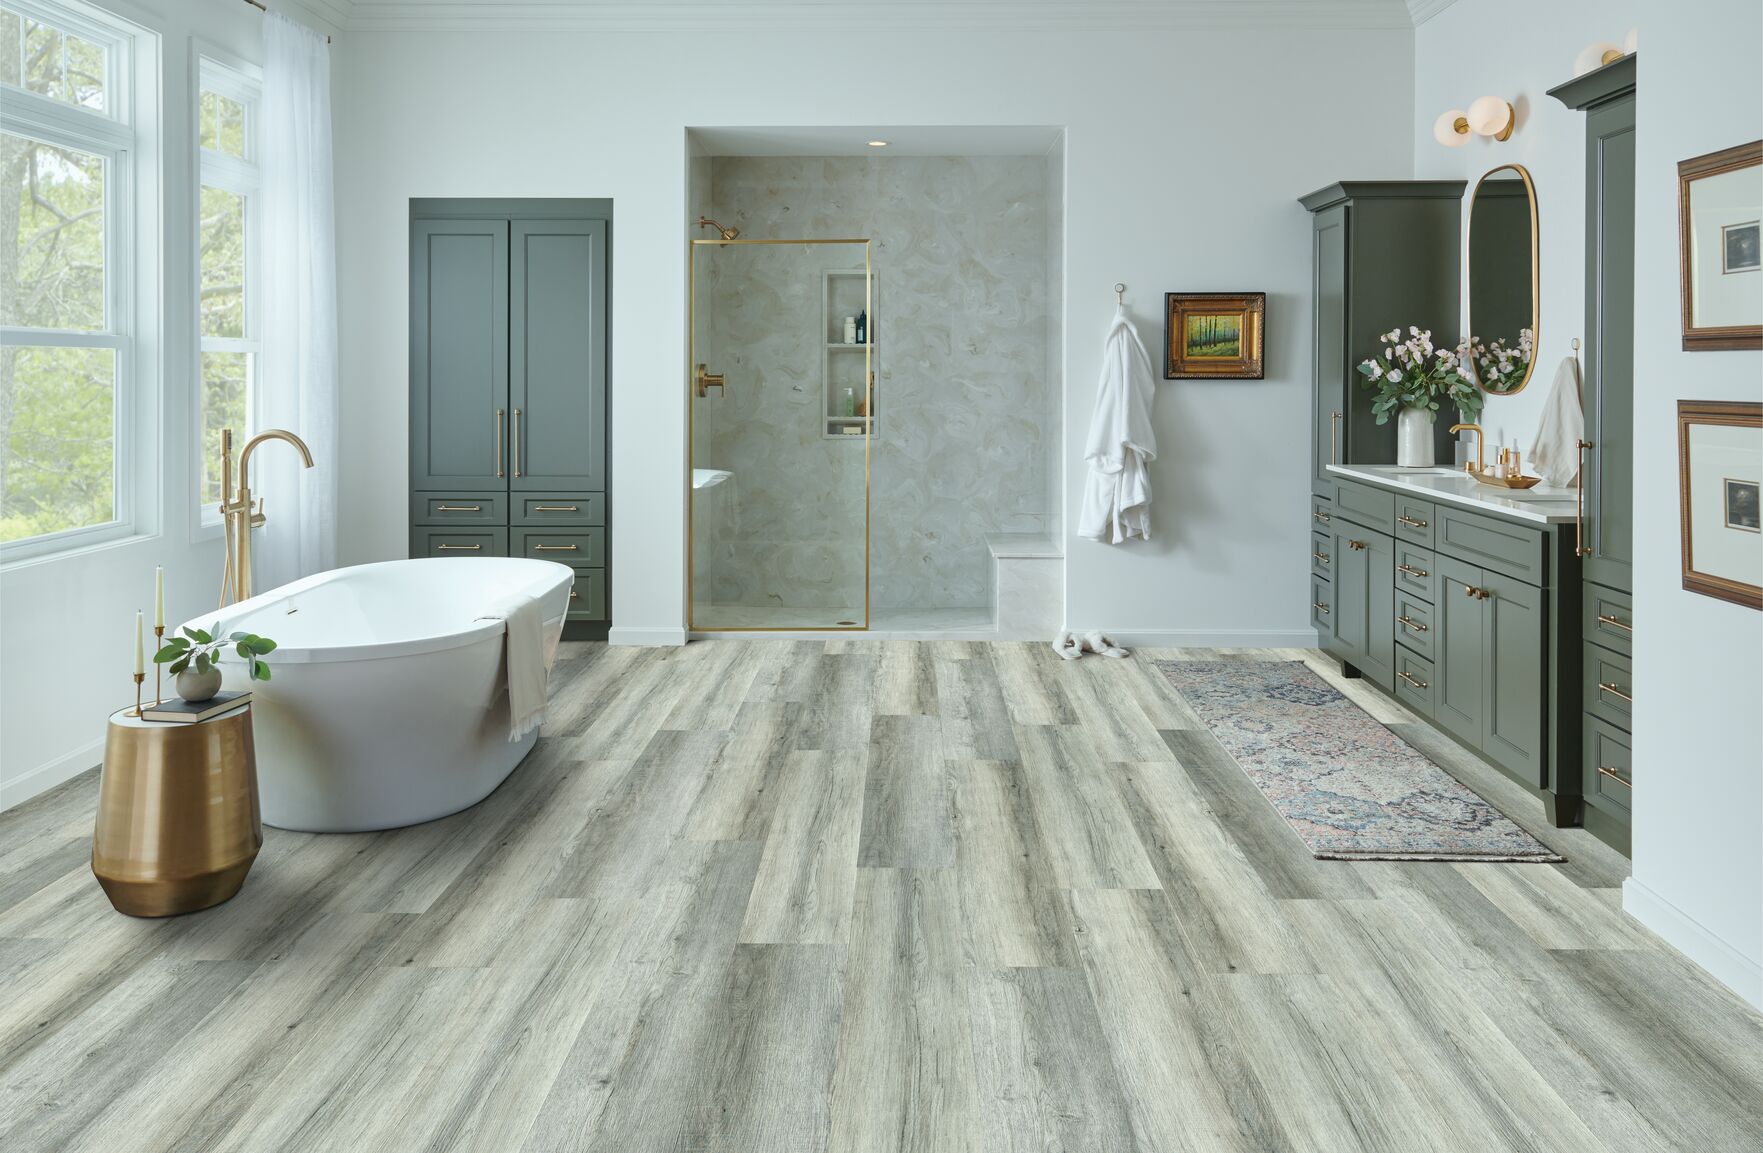 Rigid Core Flooring - Lutea Rigid Core Collection, Misted Morning AR5LS113, in a bath room